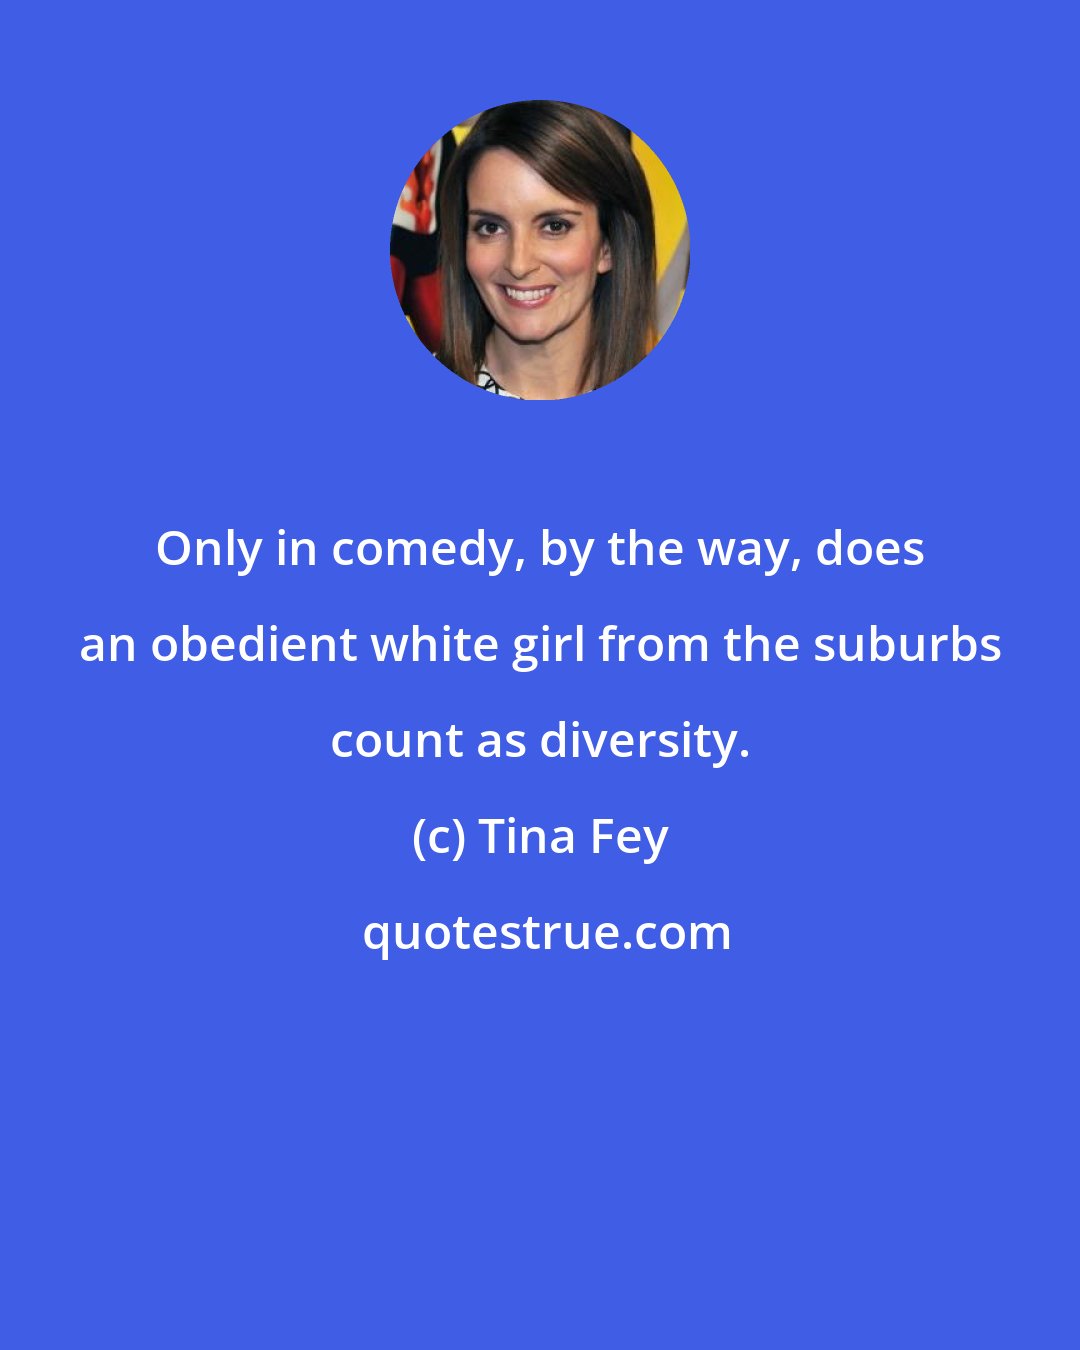 Tina Fey: Only in comedy, by the way, does an obedient white girl from the suburbs count as diversity.